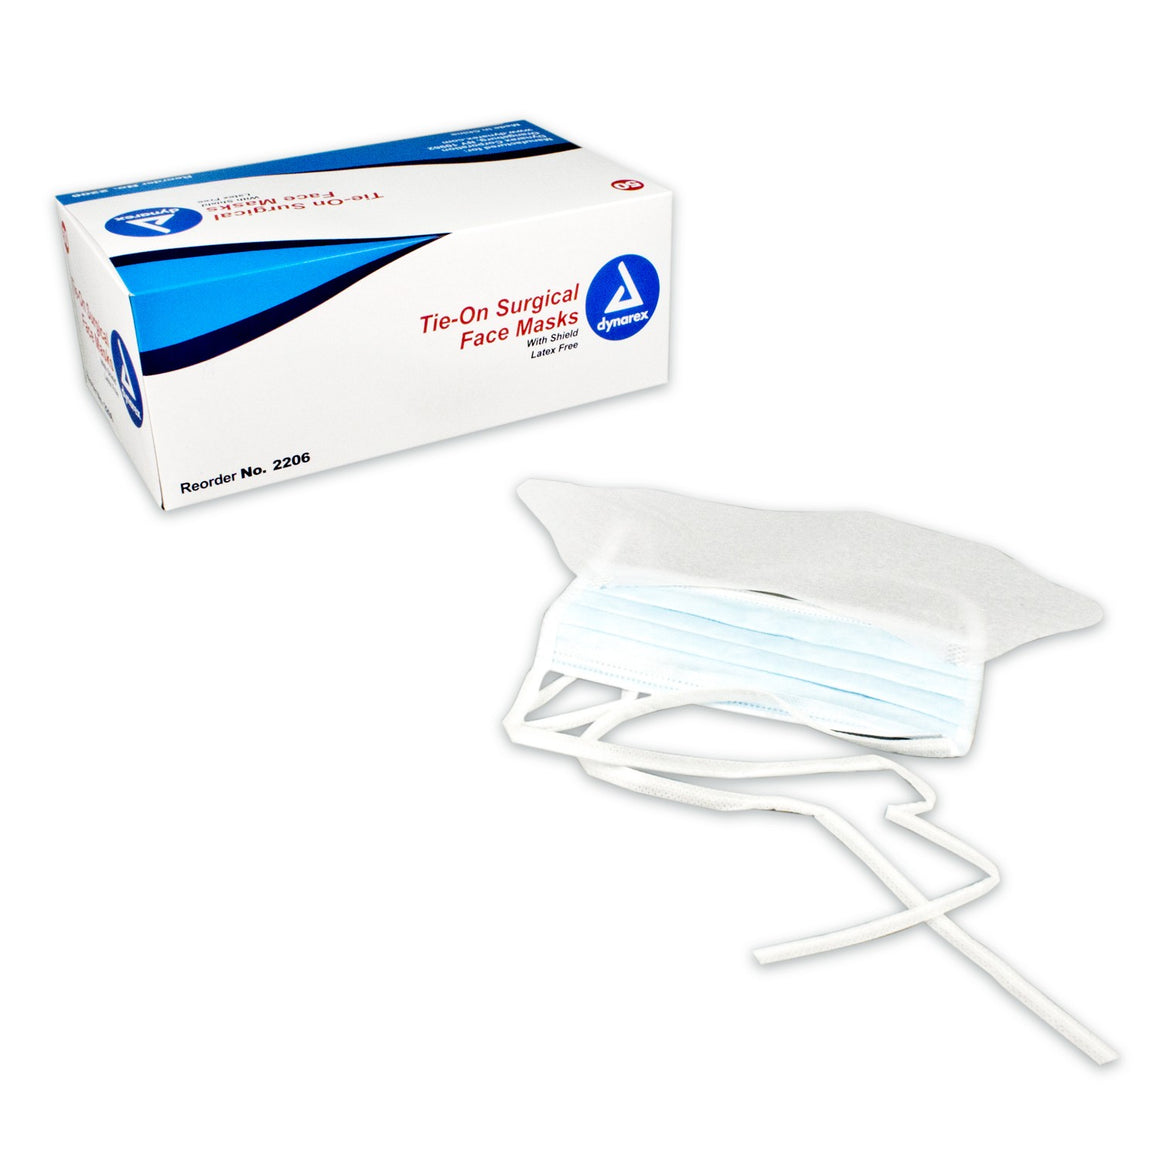 Surgical Tie-on Face Mask with Shield 50/box